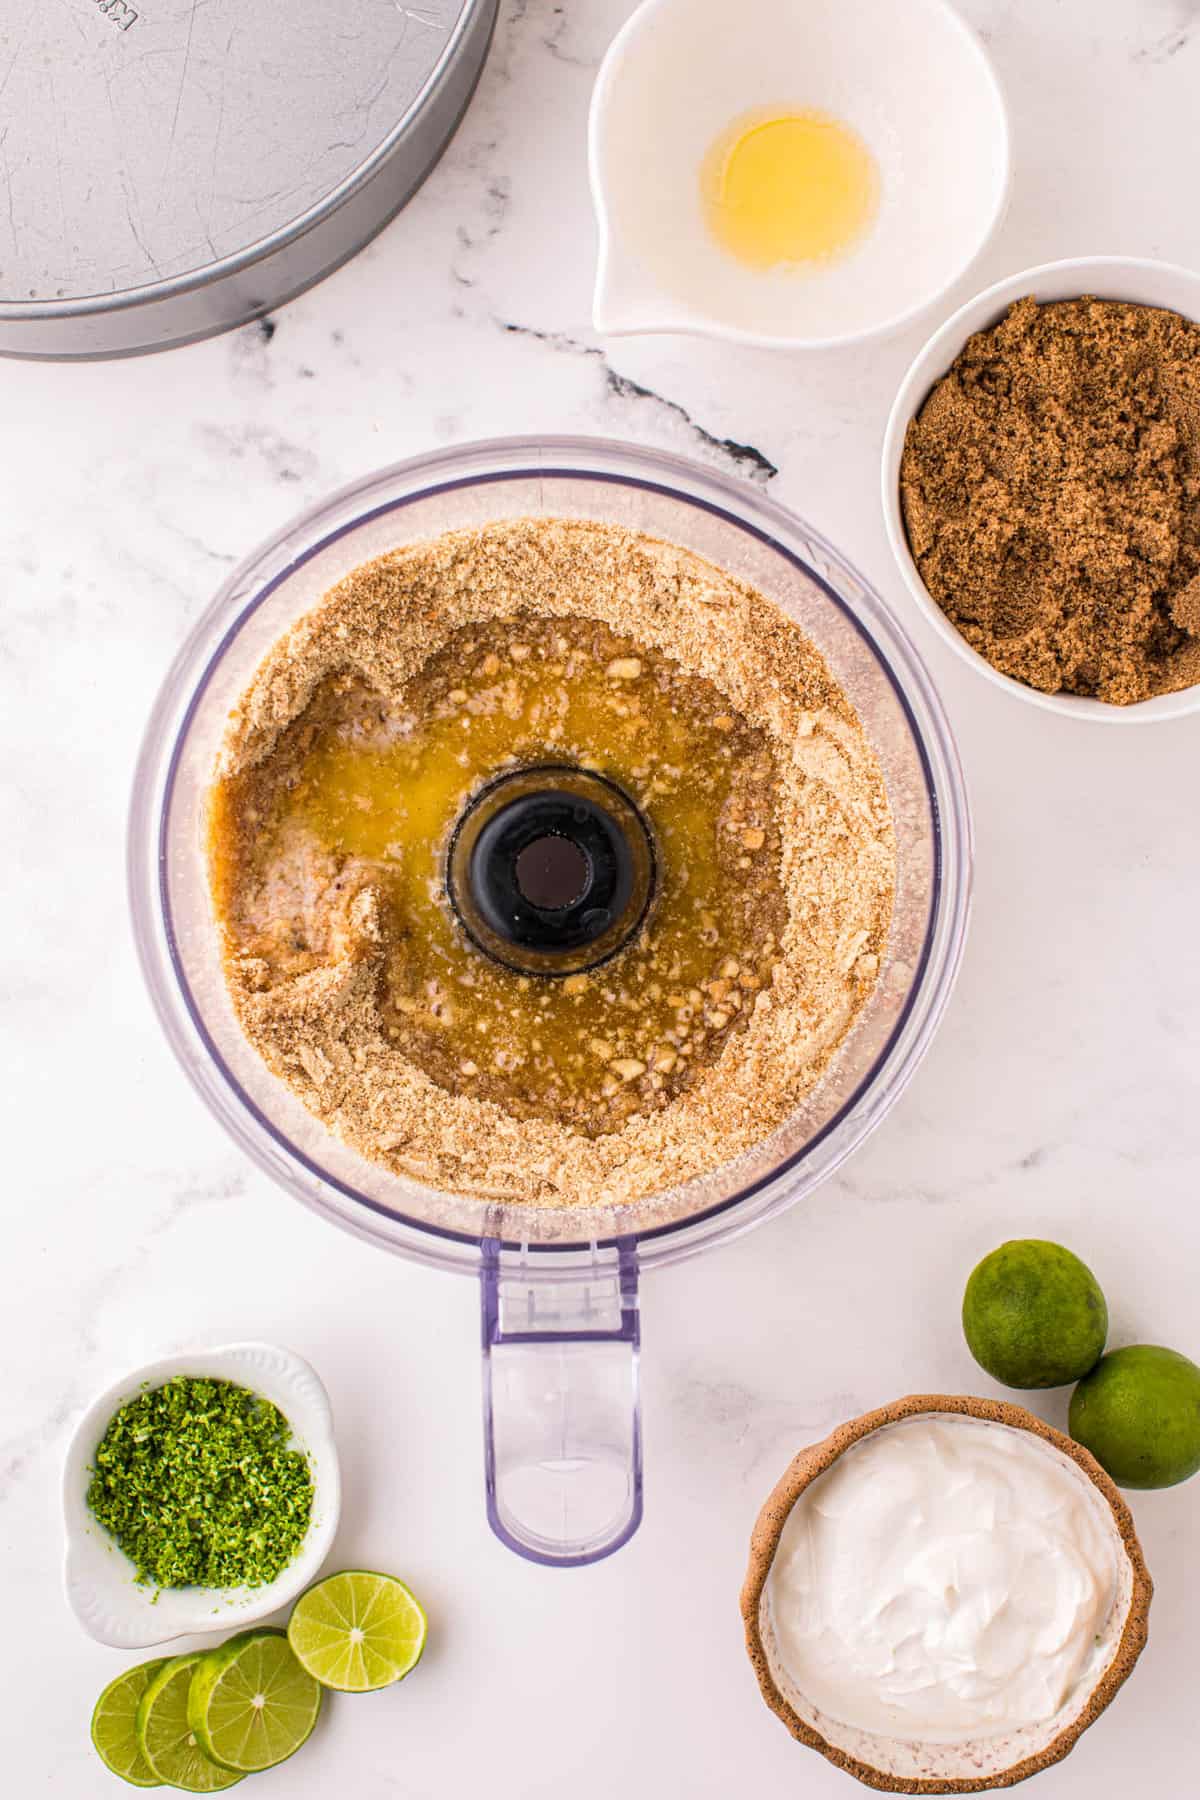 Using Food Processor to Make Crust for No Bake Key Lime Cheesecake Recipe